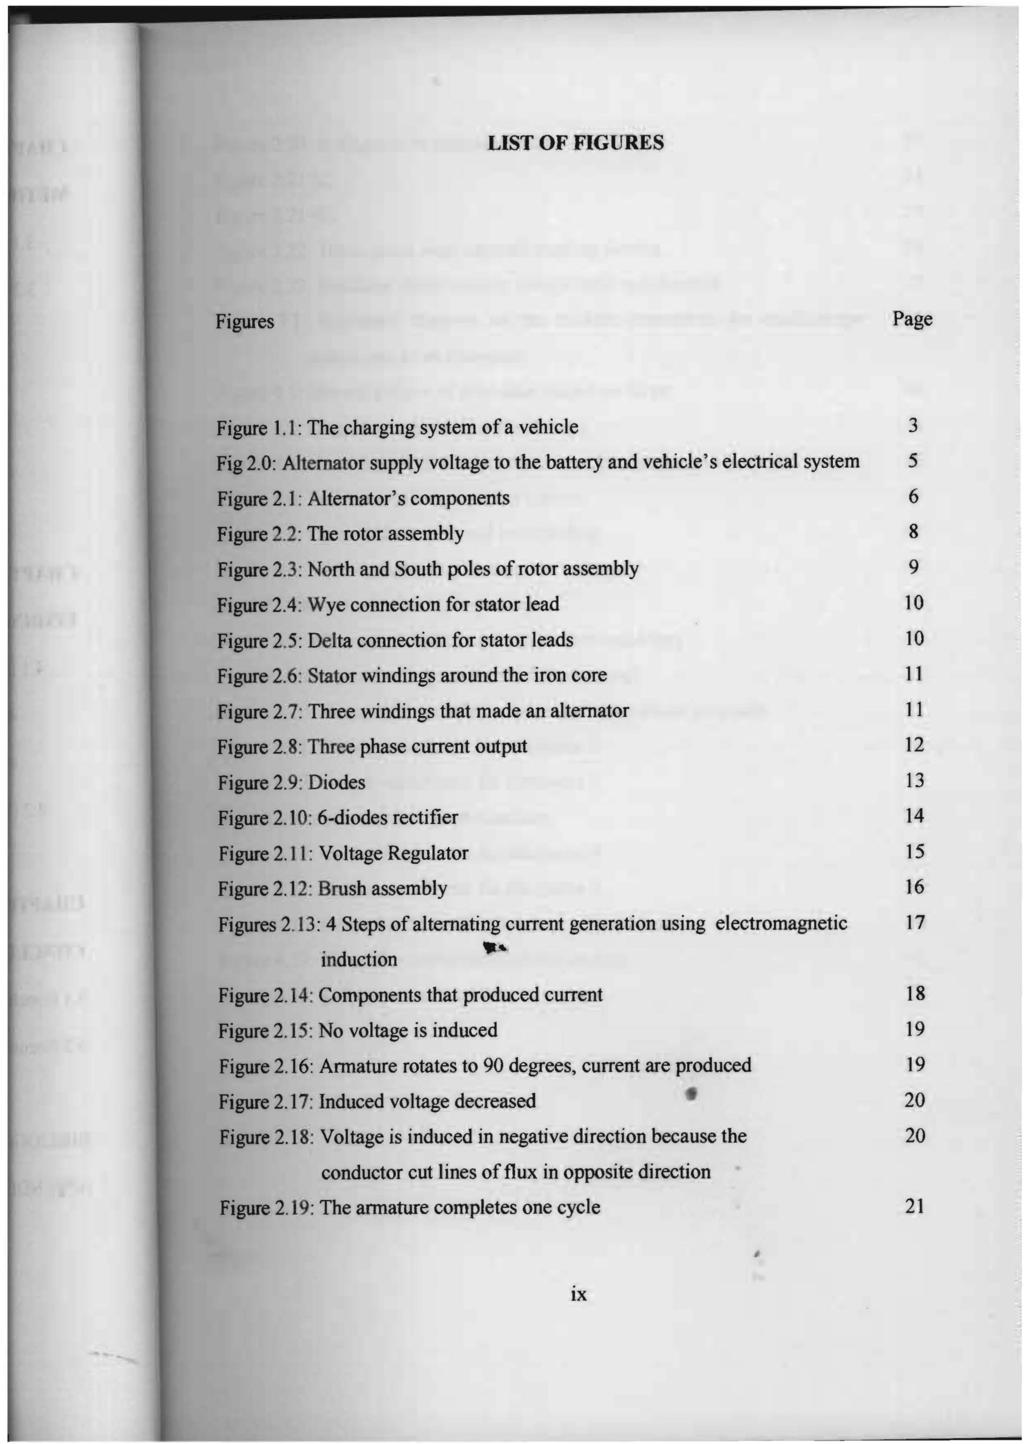 LIST OF FIGURES Figures Page Figure 1. 1: The charging system of a vehicle Fig 2.0: Alternator supply voltage to the battery and vehicle's electrical system Figure 2.